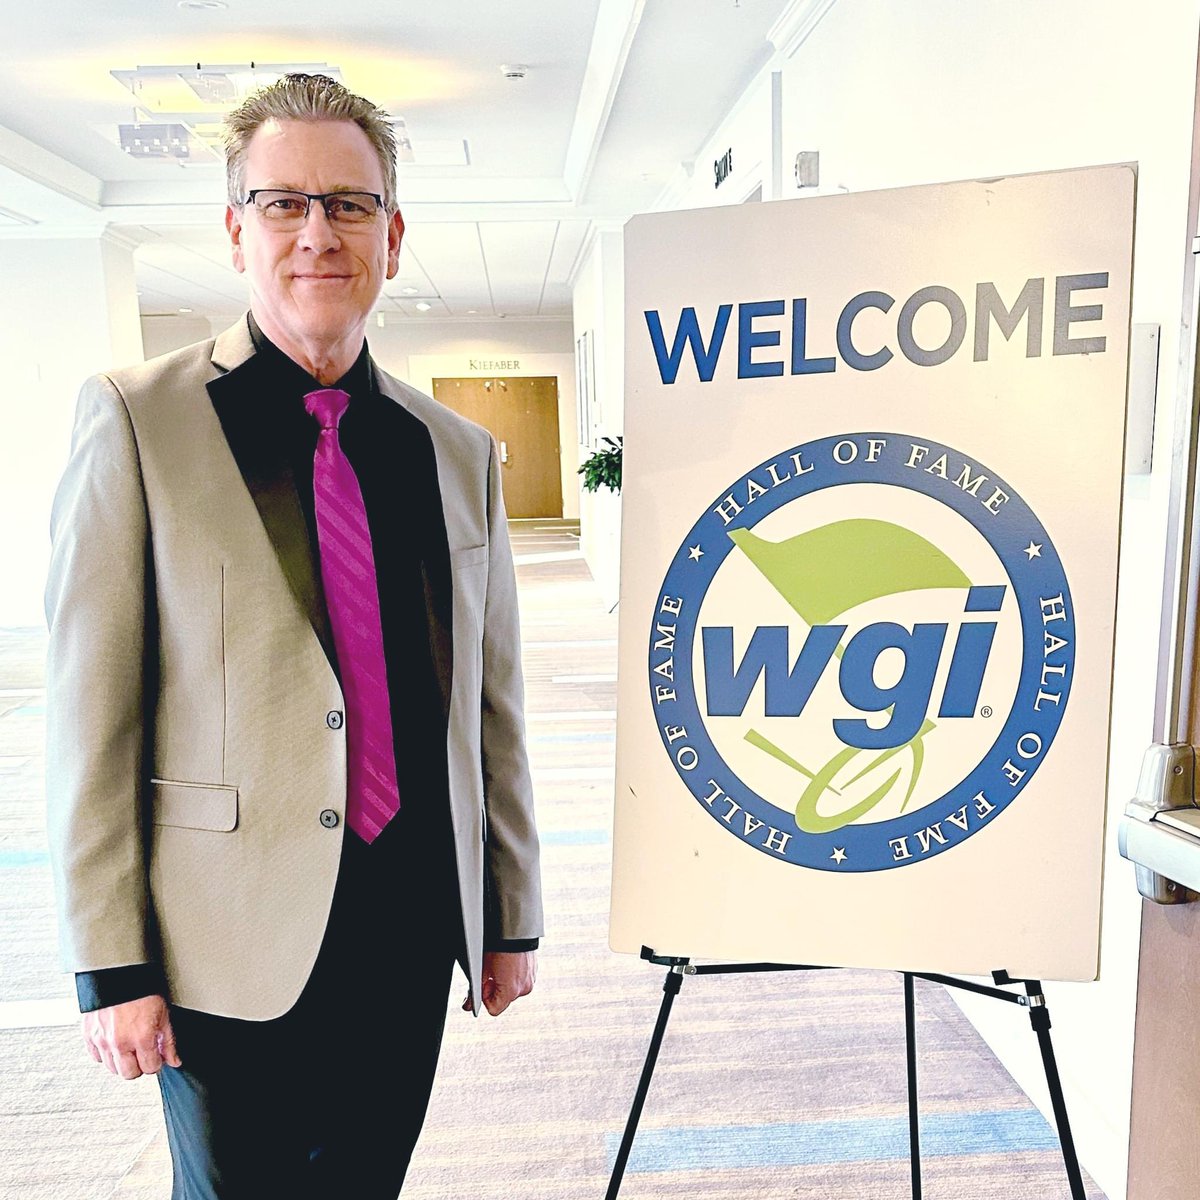 𝐂𝐨𝐧𝐠𝐫𝐚𝐭𝐮𝐥𝐚𝐭𝐢𝐨𝐧𝐬 𝐉𝐞𝐟𝐟! 🎉 Carolina Crown would like to congratulate our very own Jeff Sacktig for his well-deserved induction into the WGI Hall of Fame this week in Dayton, Ohio! ➡️ Read more: wgi.org/2024-hall-of-f…